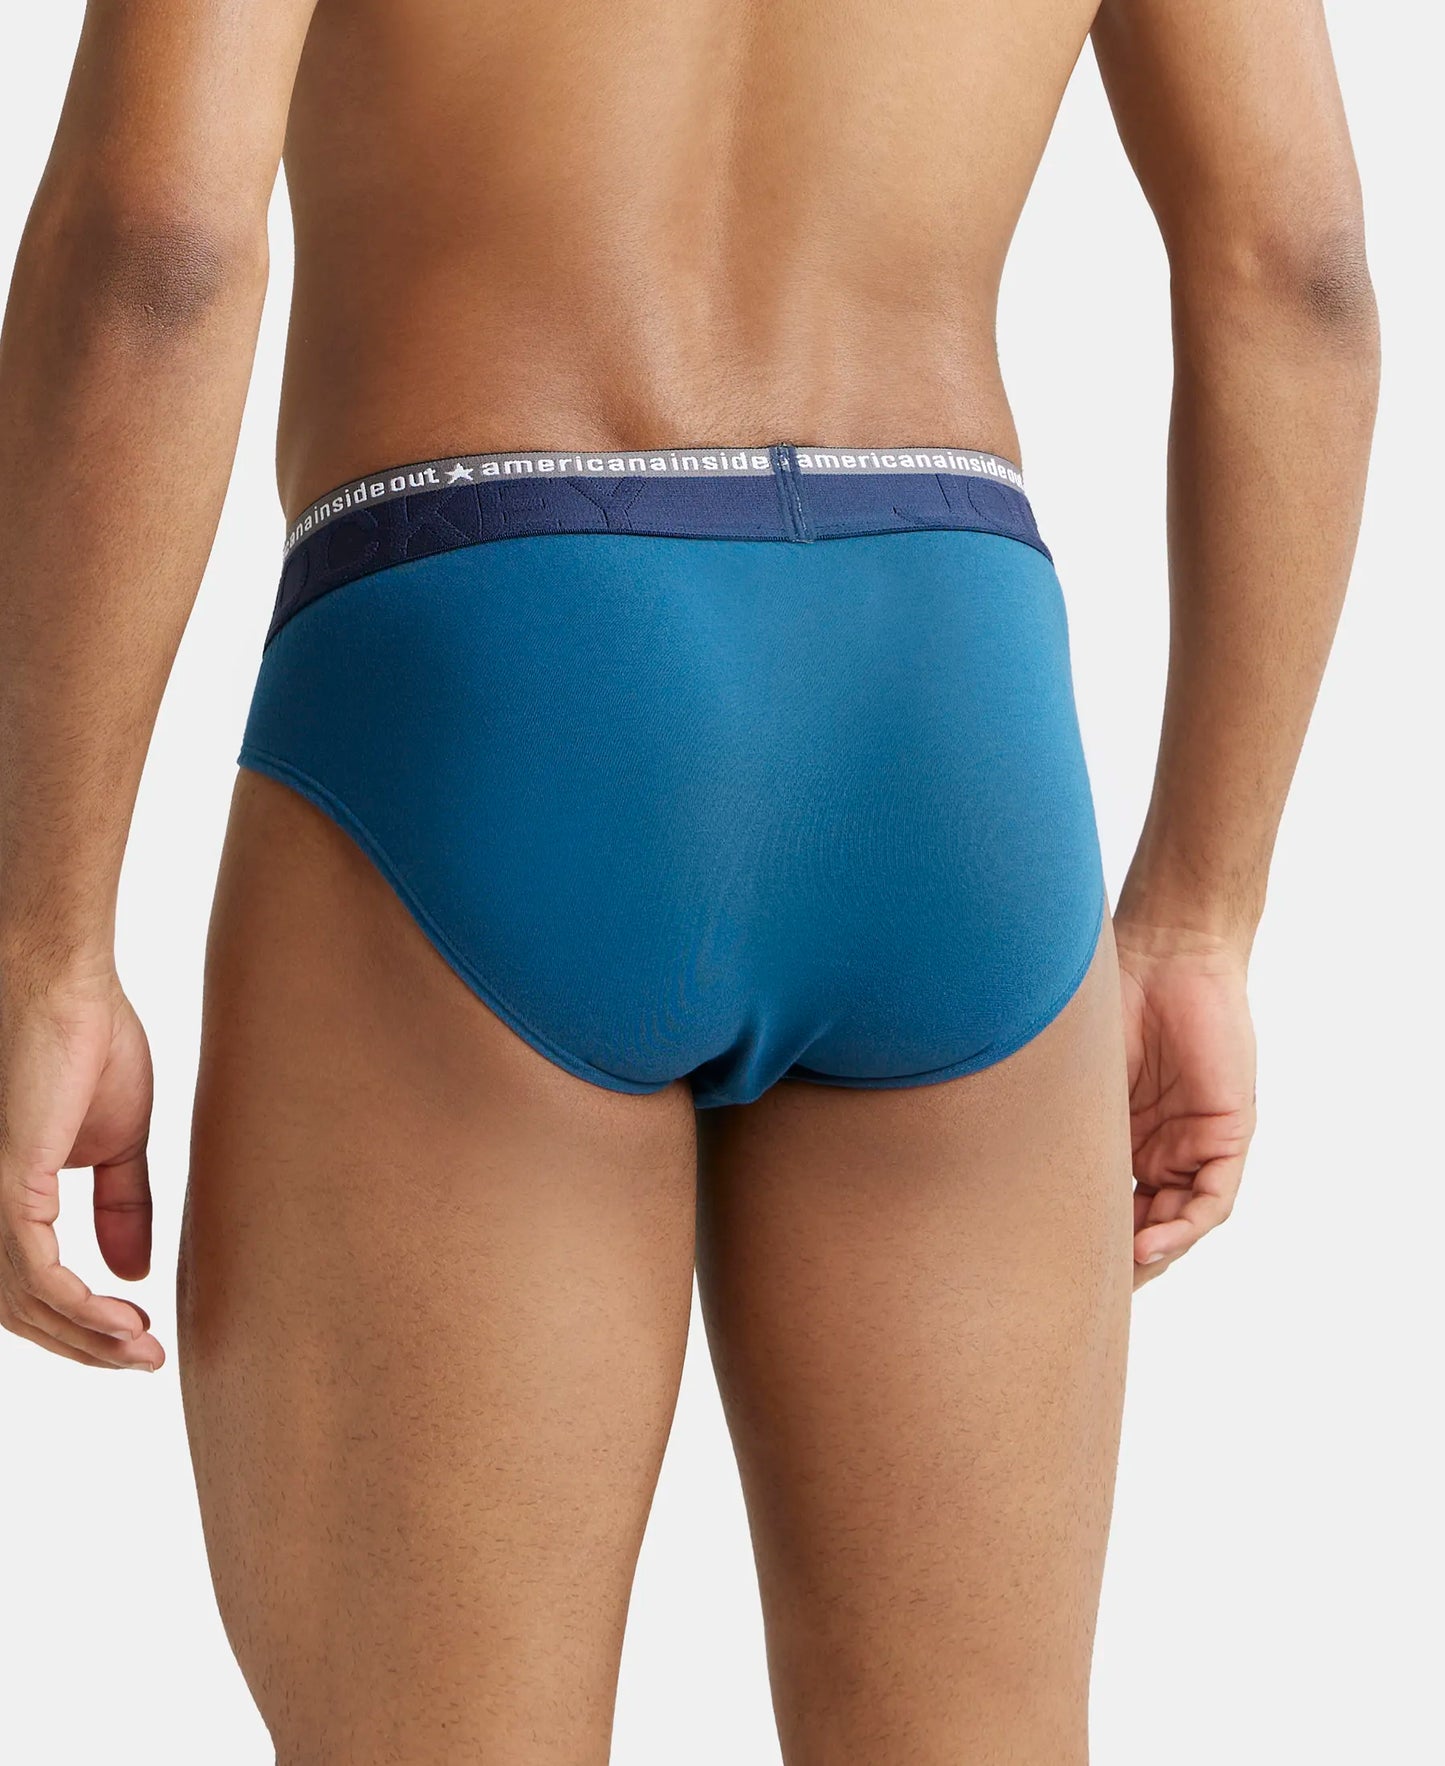 Super Combed Cotton Elastane Solid Brief with Ultrasoft Waistband - Seaport Teal-4